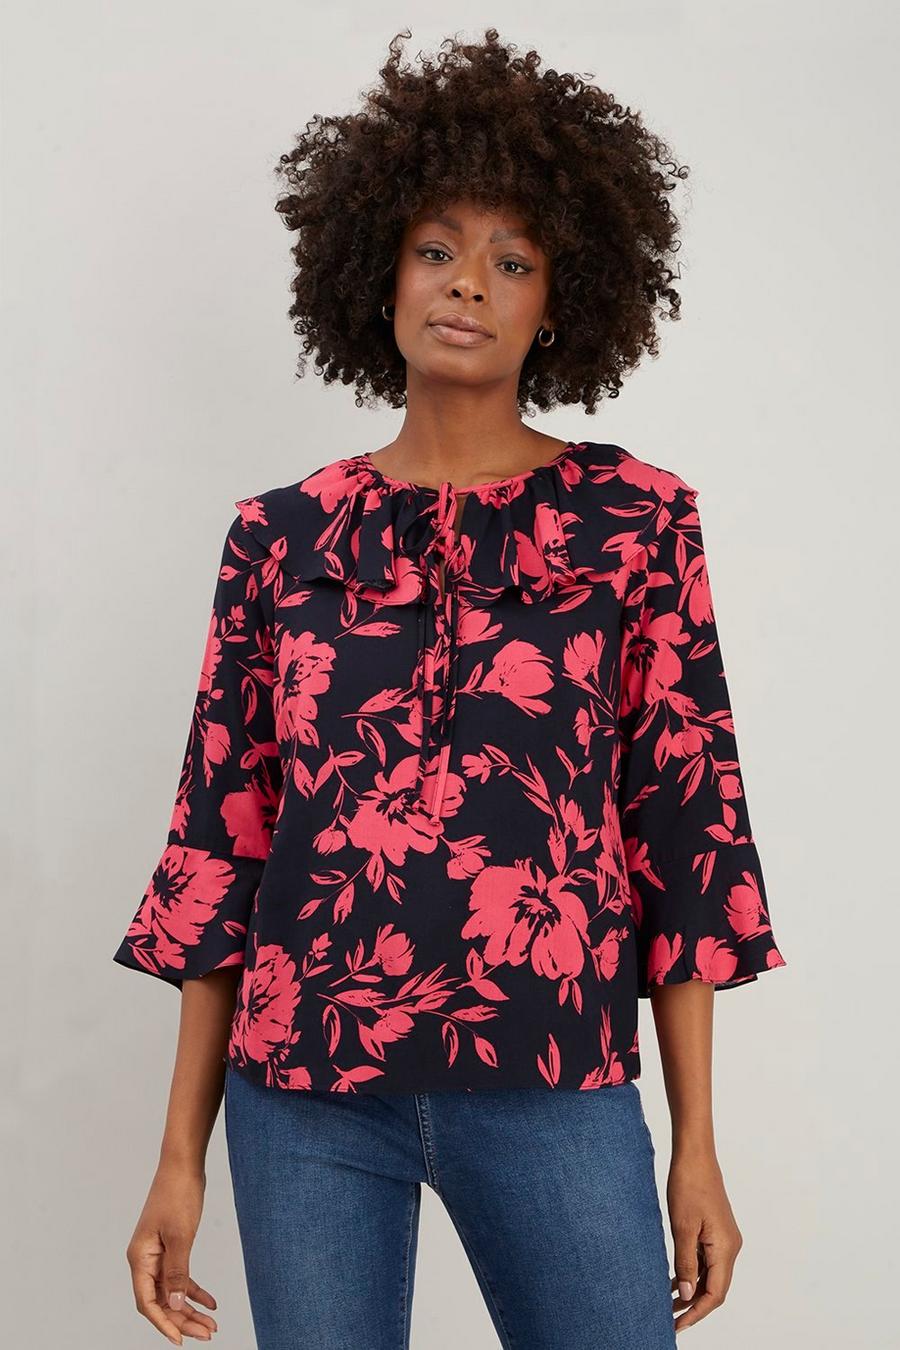 Black and Pink Floral Ruffle Tie Neck